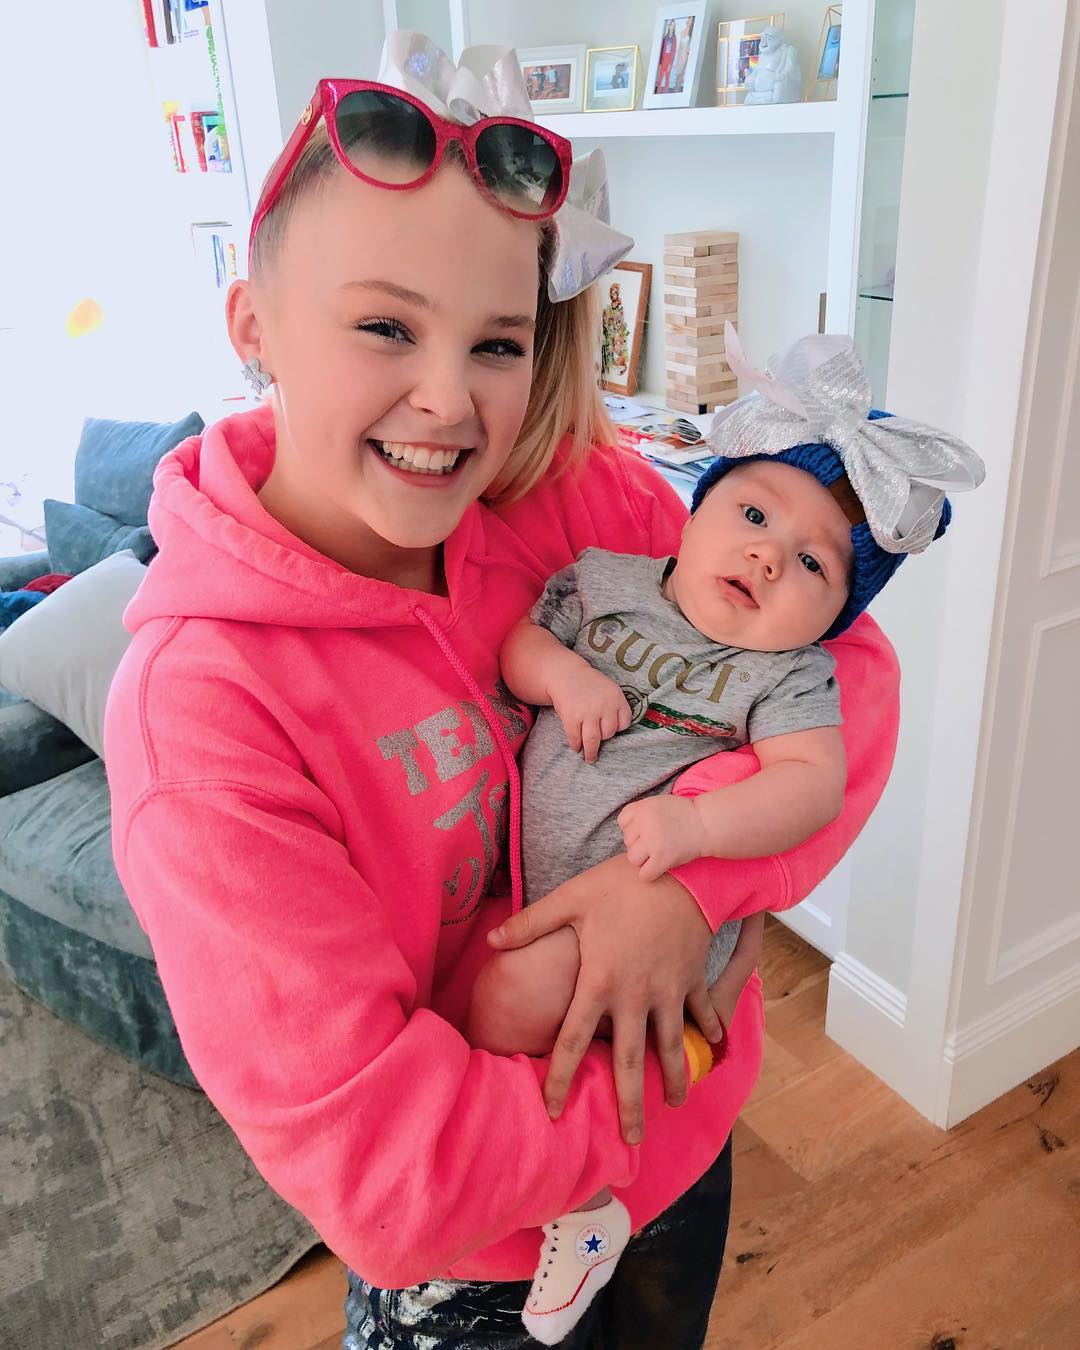 28 Hot Pictures Of Jojo Siwa That Will Make Your Heart Pound For Her | Best Of Comic Books